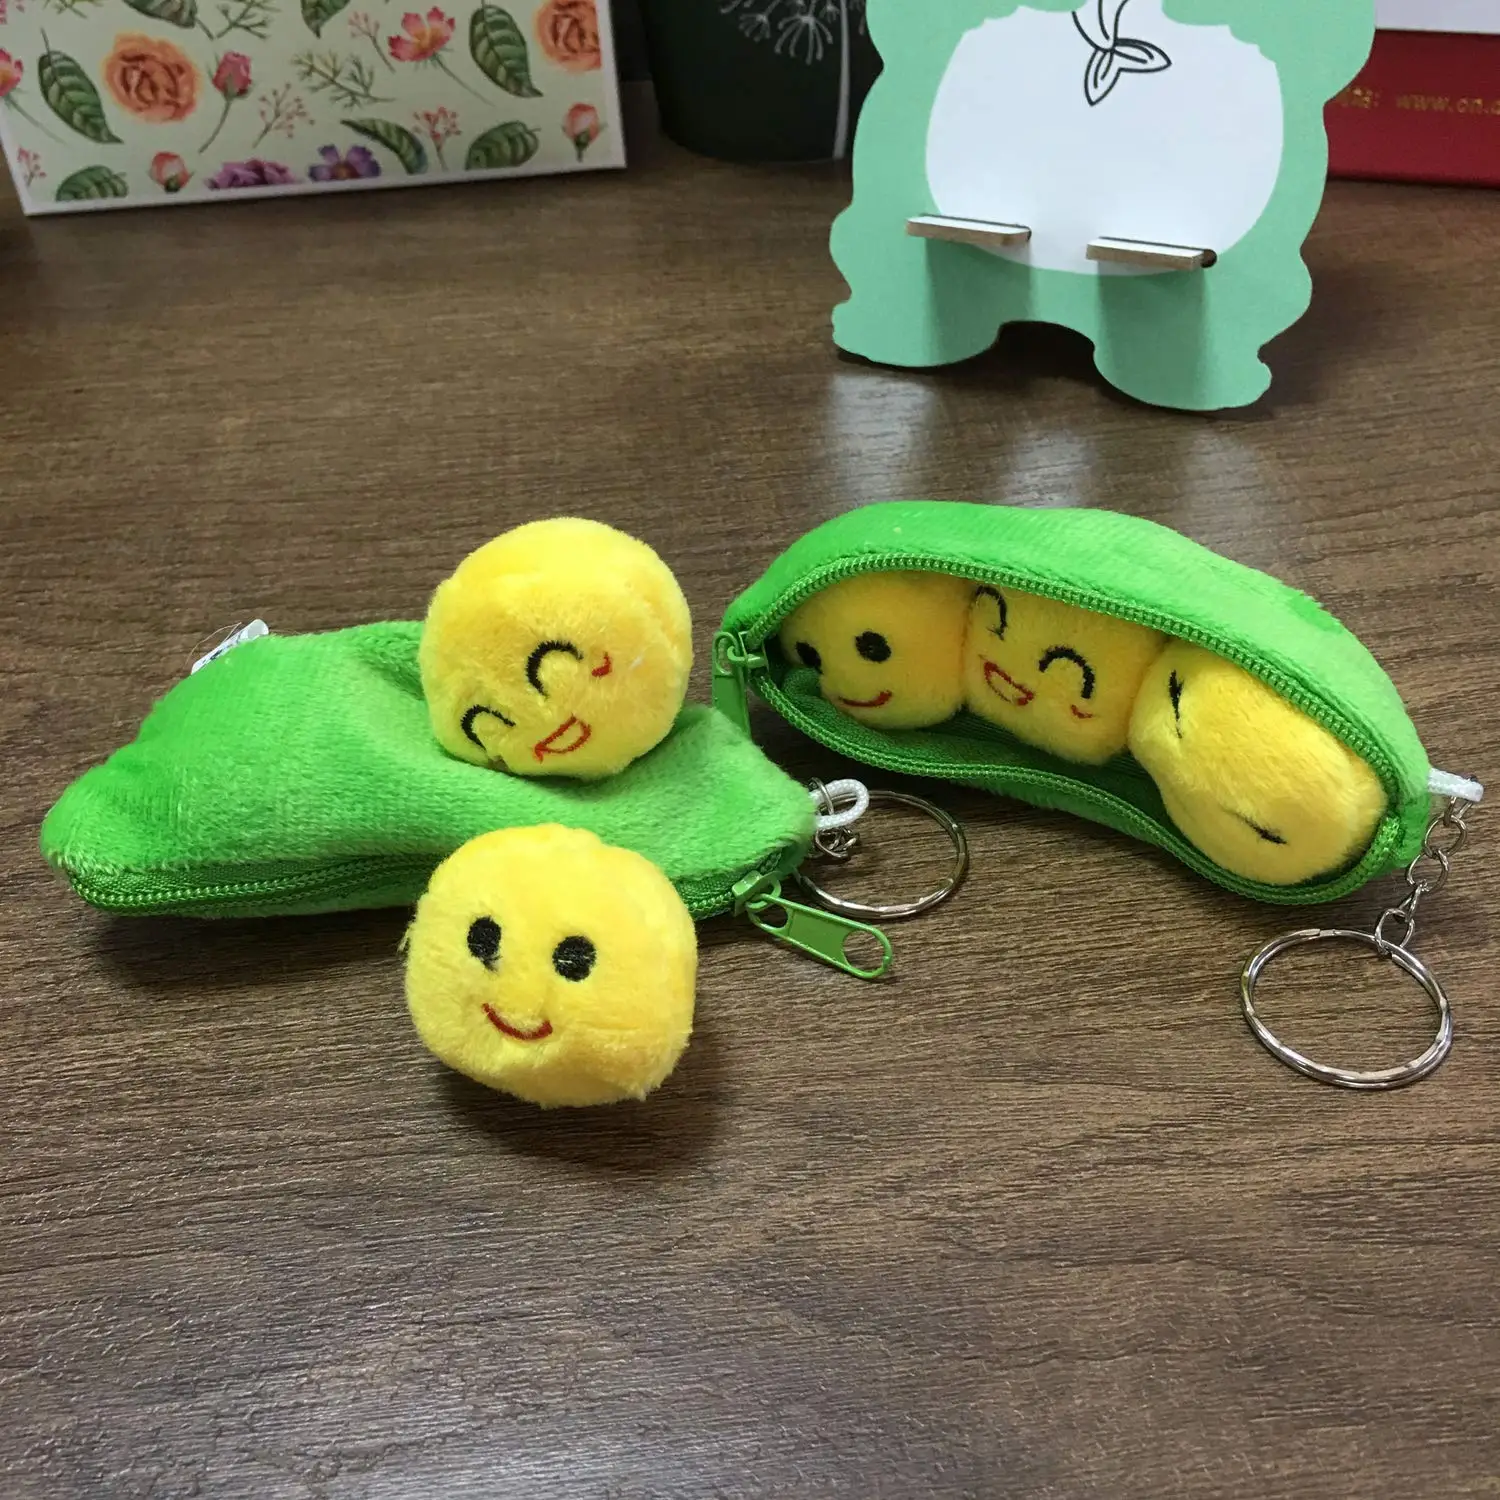 

Creative Plush Keychains Mini Stuffed Toys 3 Peas in a Pod 4 Inch 2 Set of Bean Bags with Cute Yellow Peas